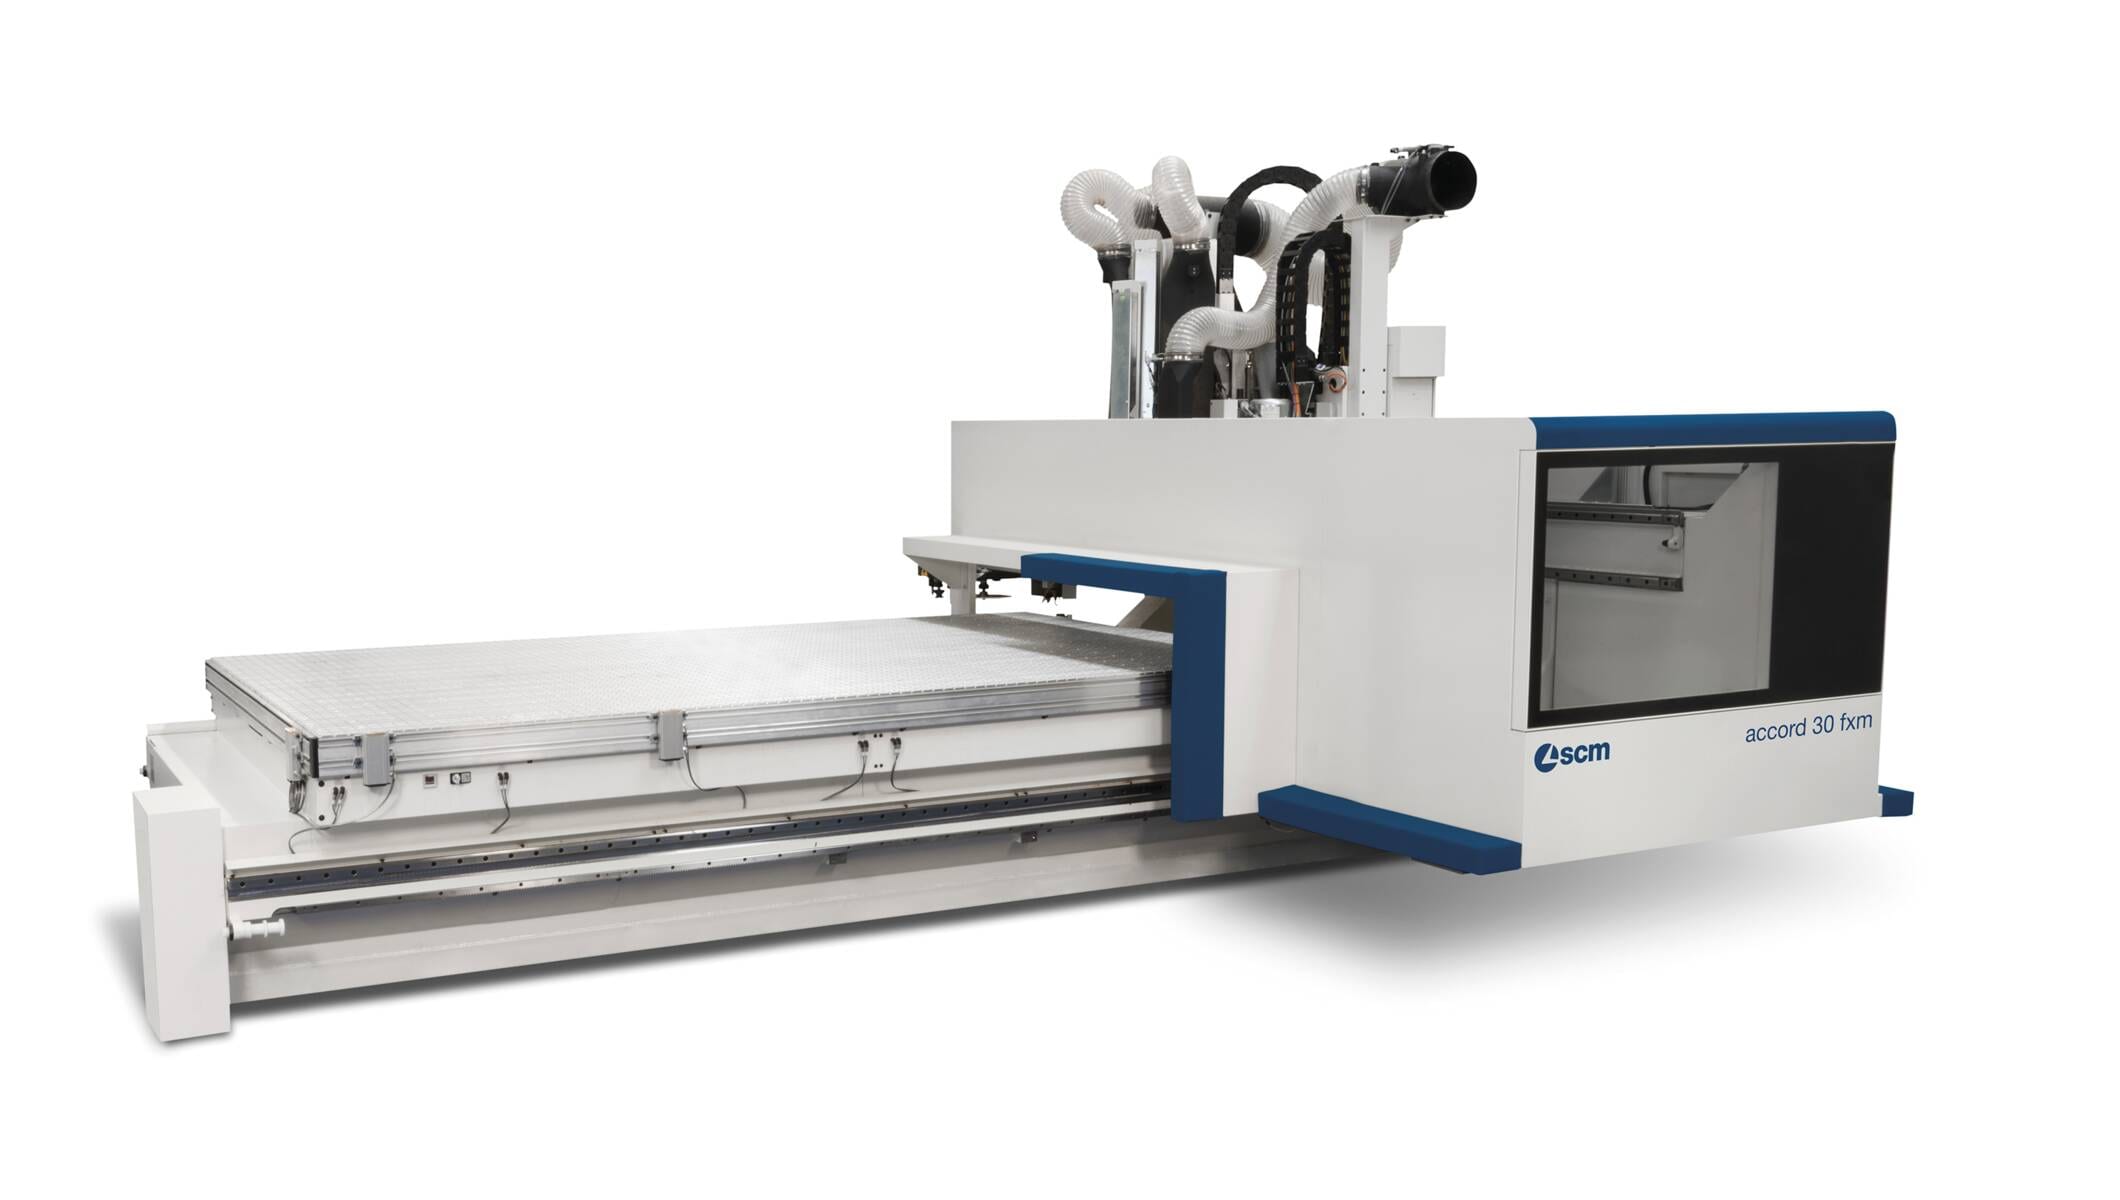 CNC Machining Centres - CNC Nesting Machining Centres for routing and drilling - accord 30 fxm